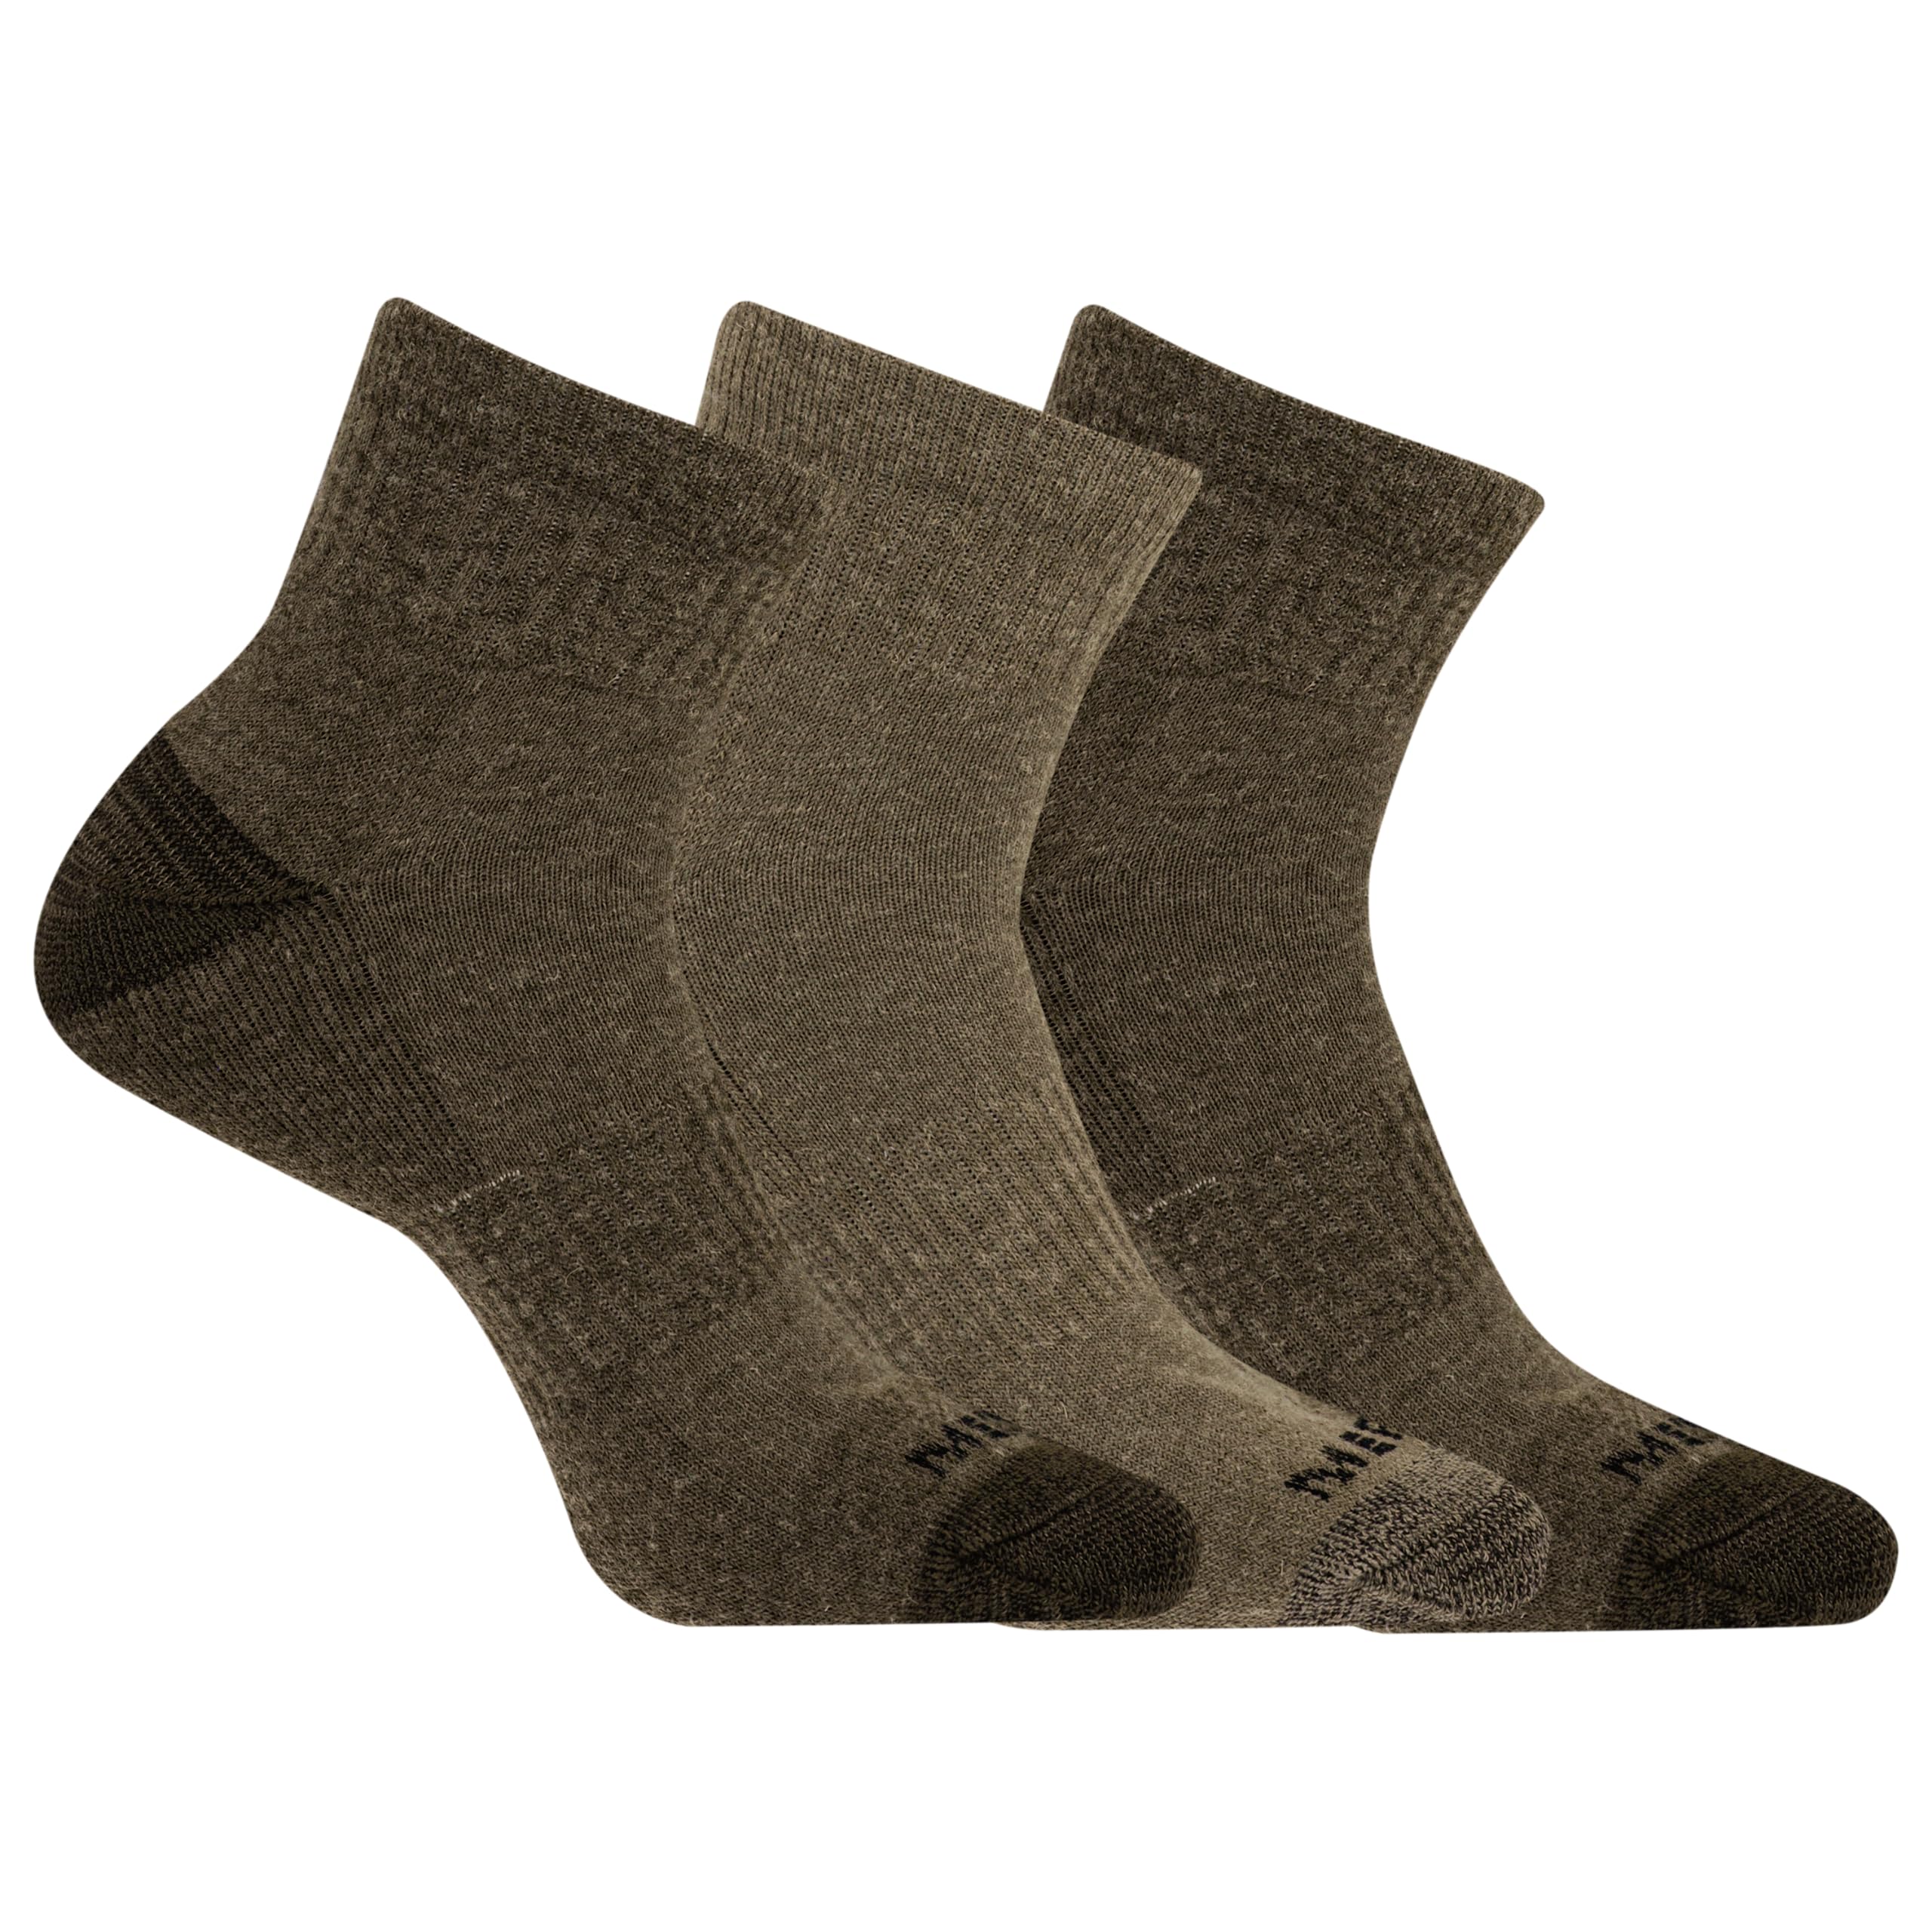 Merrell Men's and Women's Wool Everyday Hiking Socks - 3 Pair Pack - Cushion Arch Support & Moisture Wicking